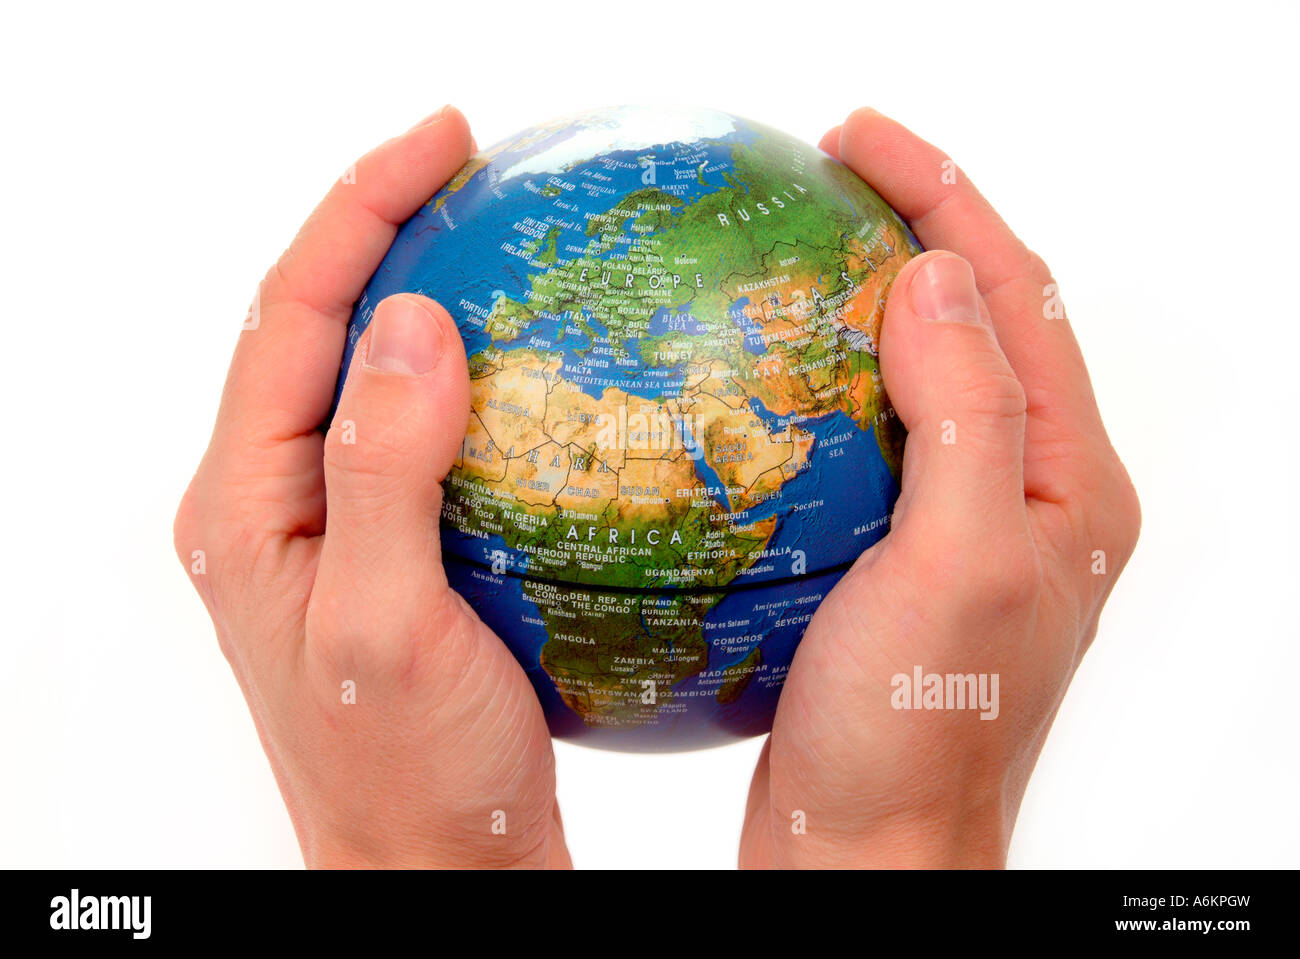 hands holding a globe Stock Photo